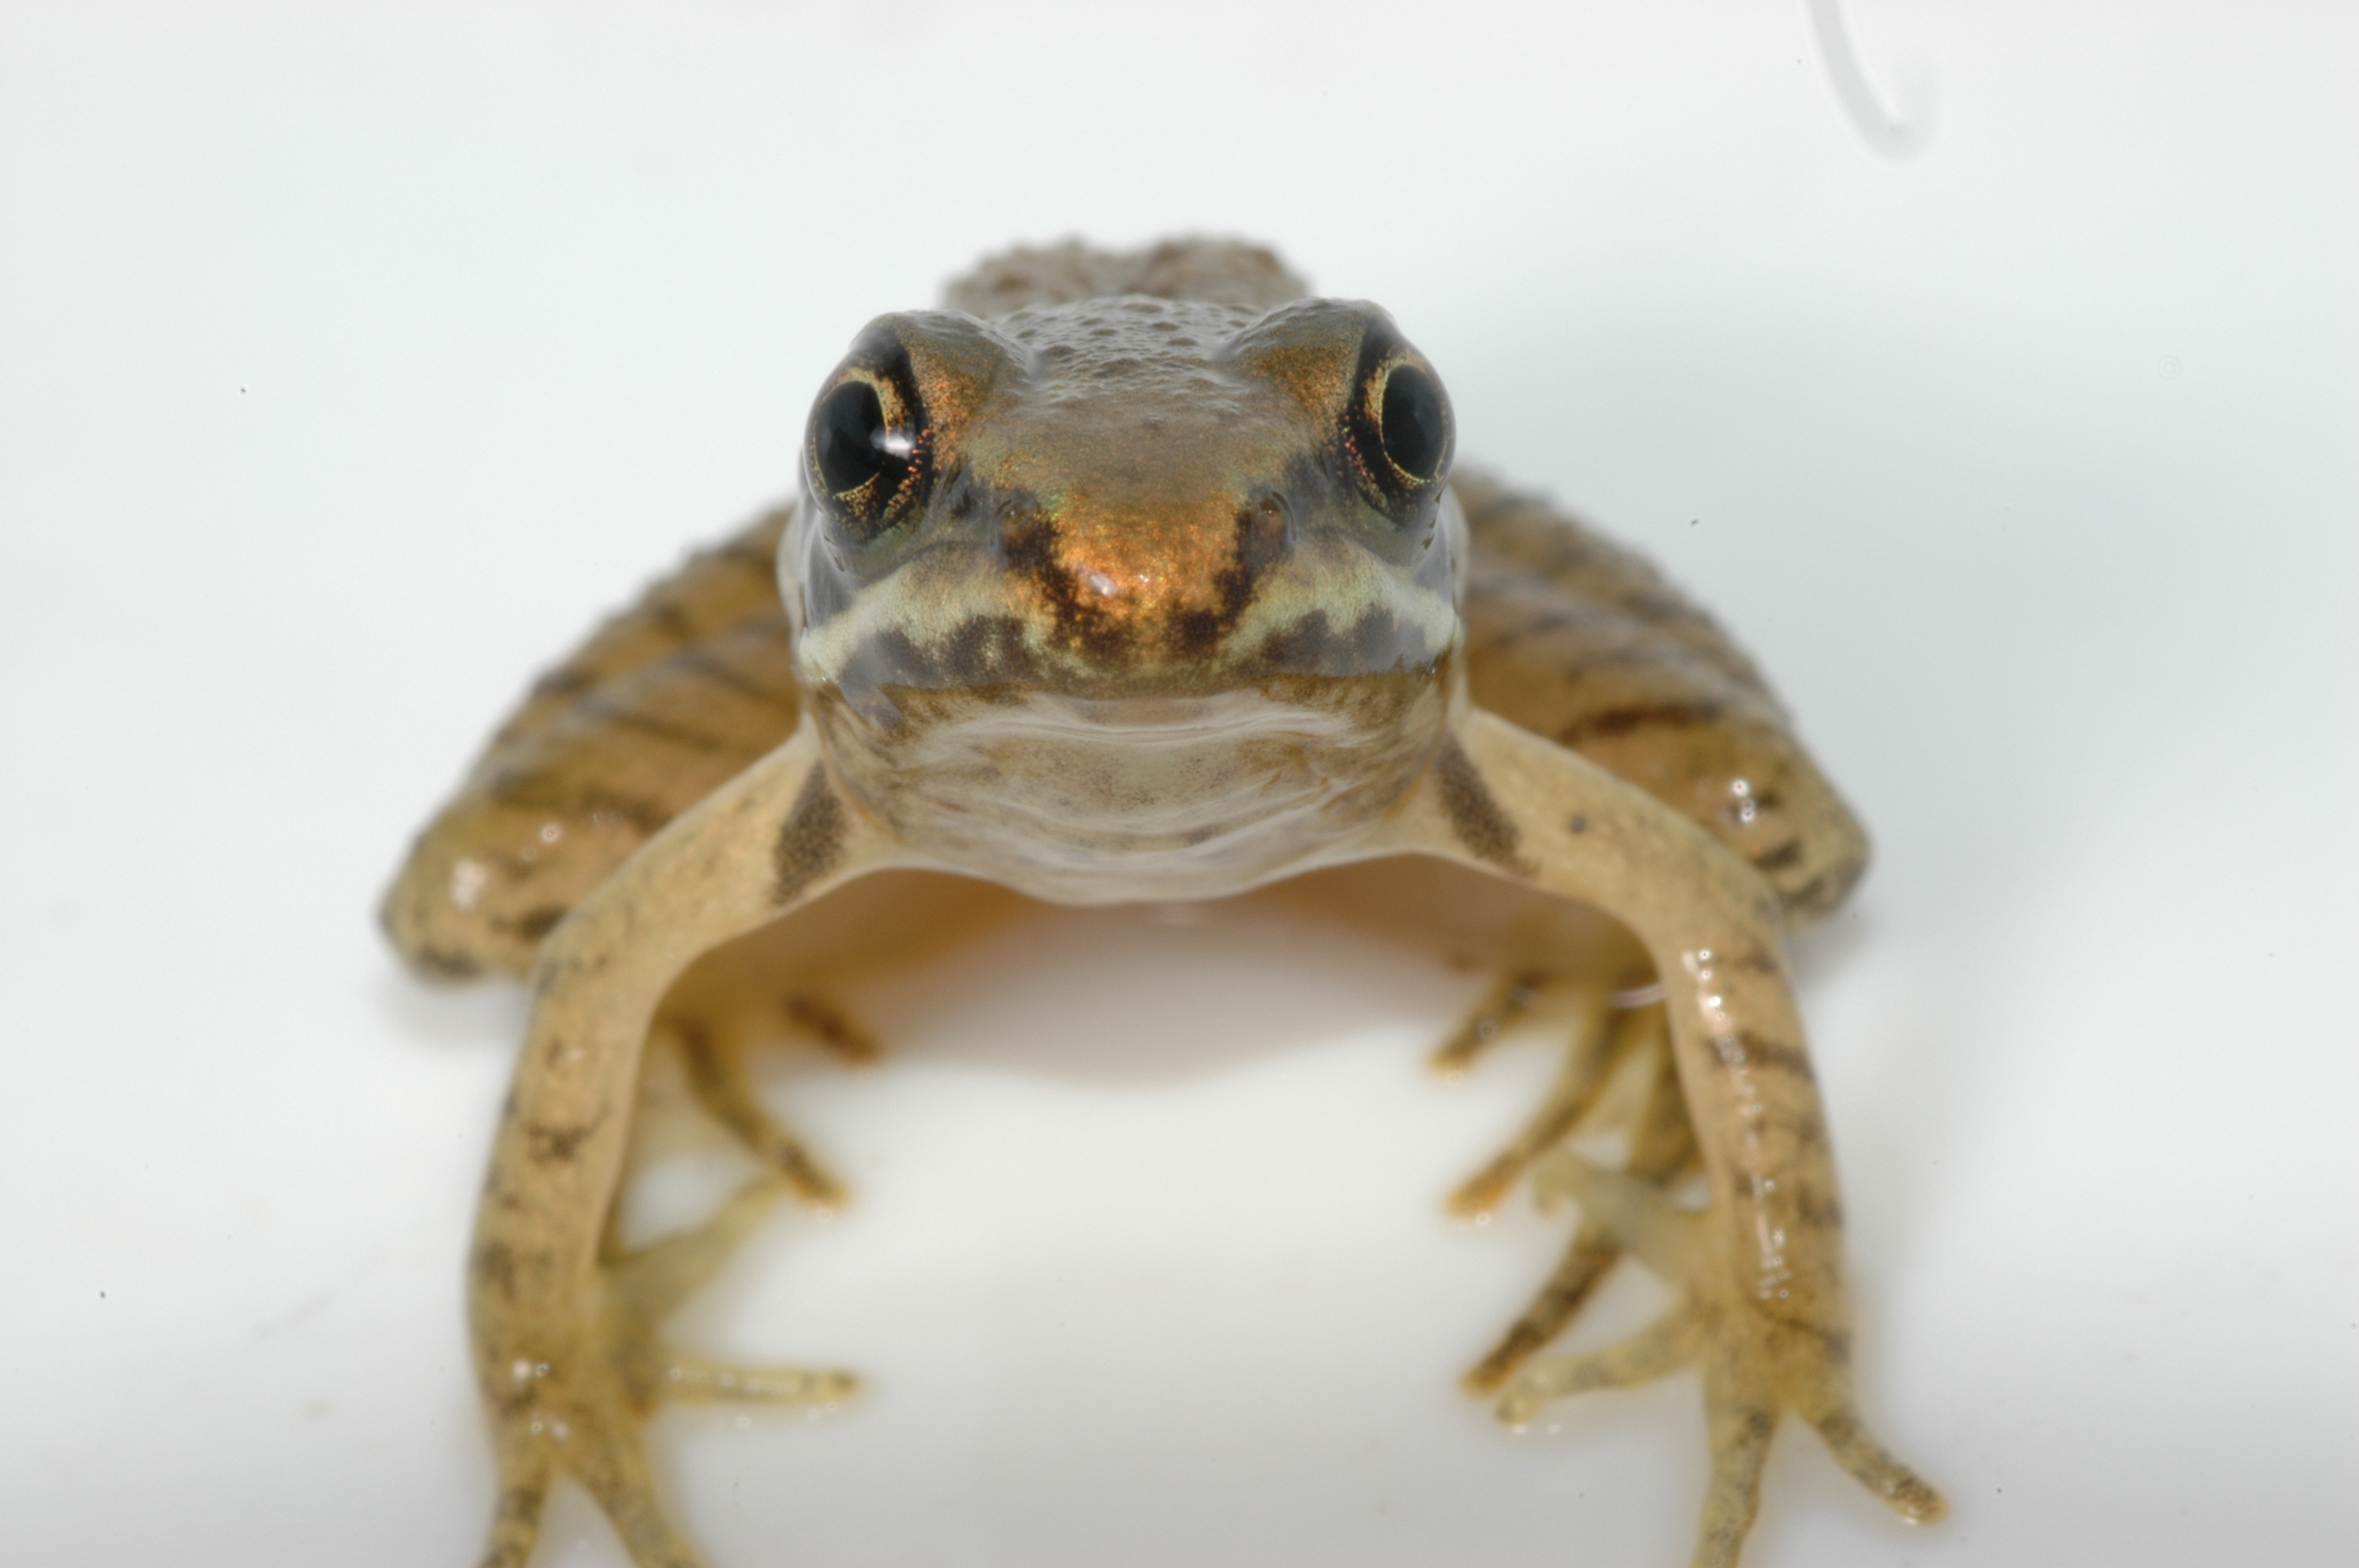 This photo shows a golden brown frog looking directly at the camera.